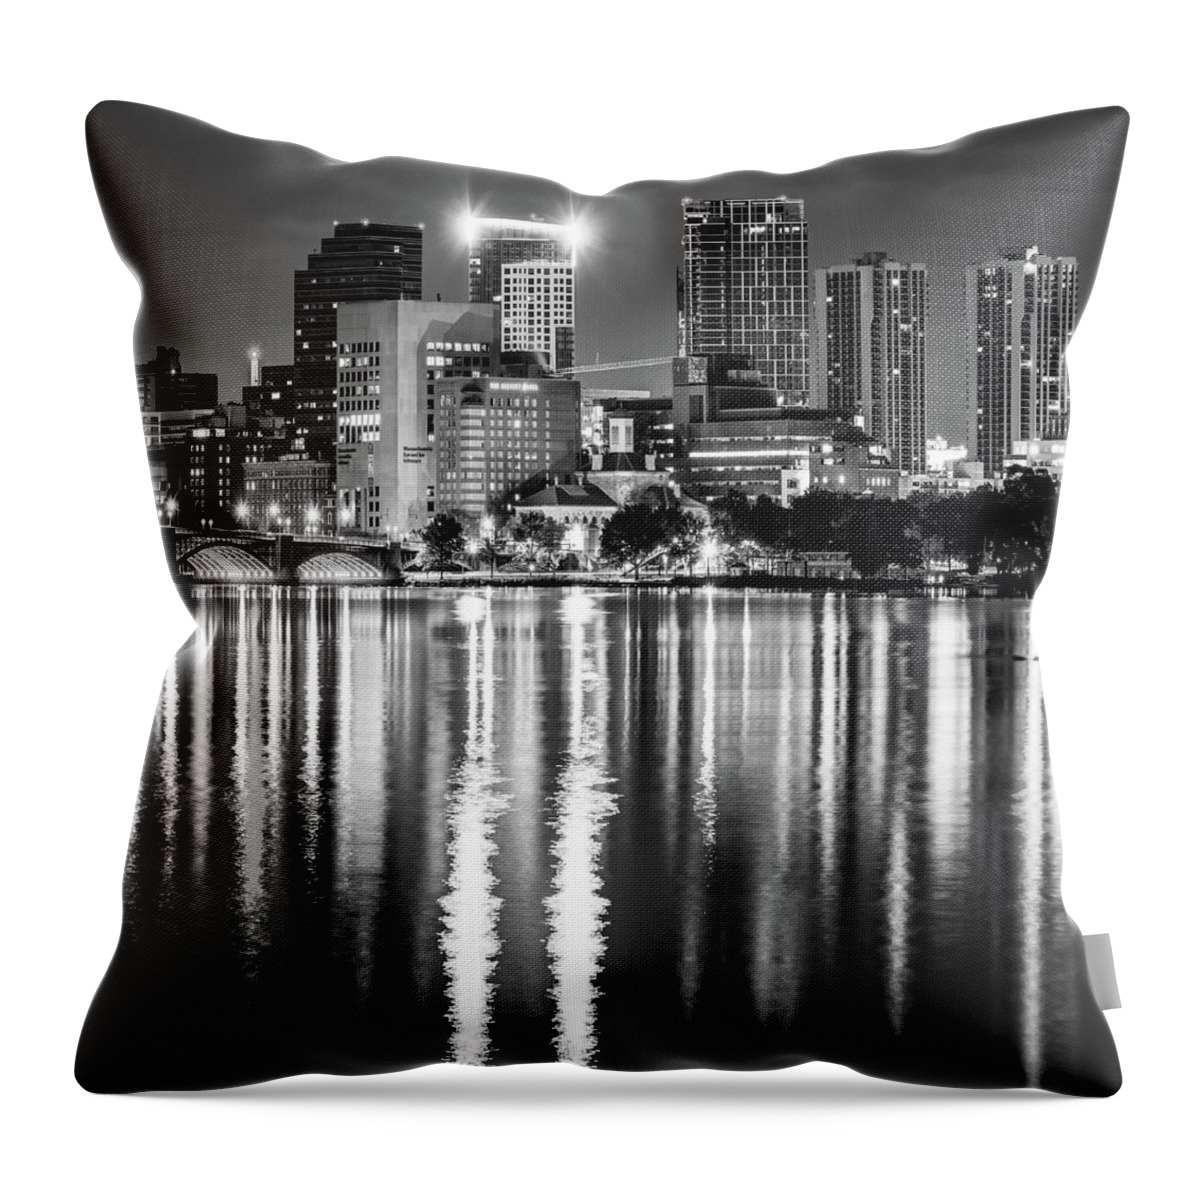 Boston Skyline Throw Pillow featuring the photograph Boston City Skyline Over The Charles River - Black and White Grayscale by Gregory Ballos